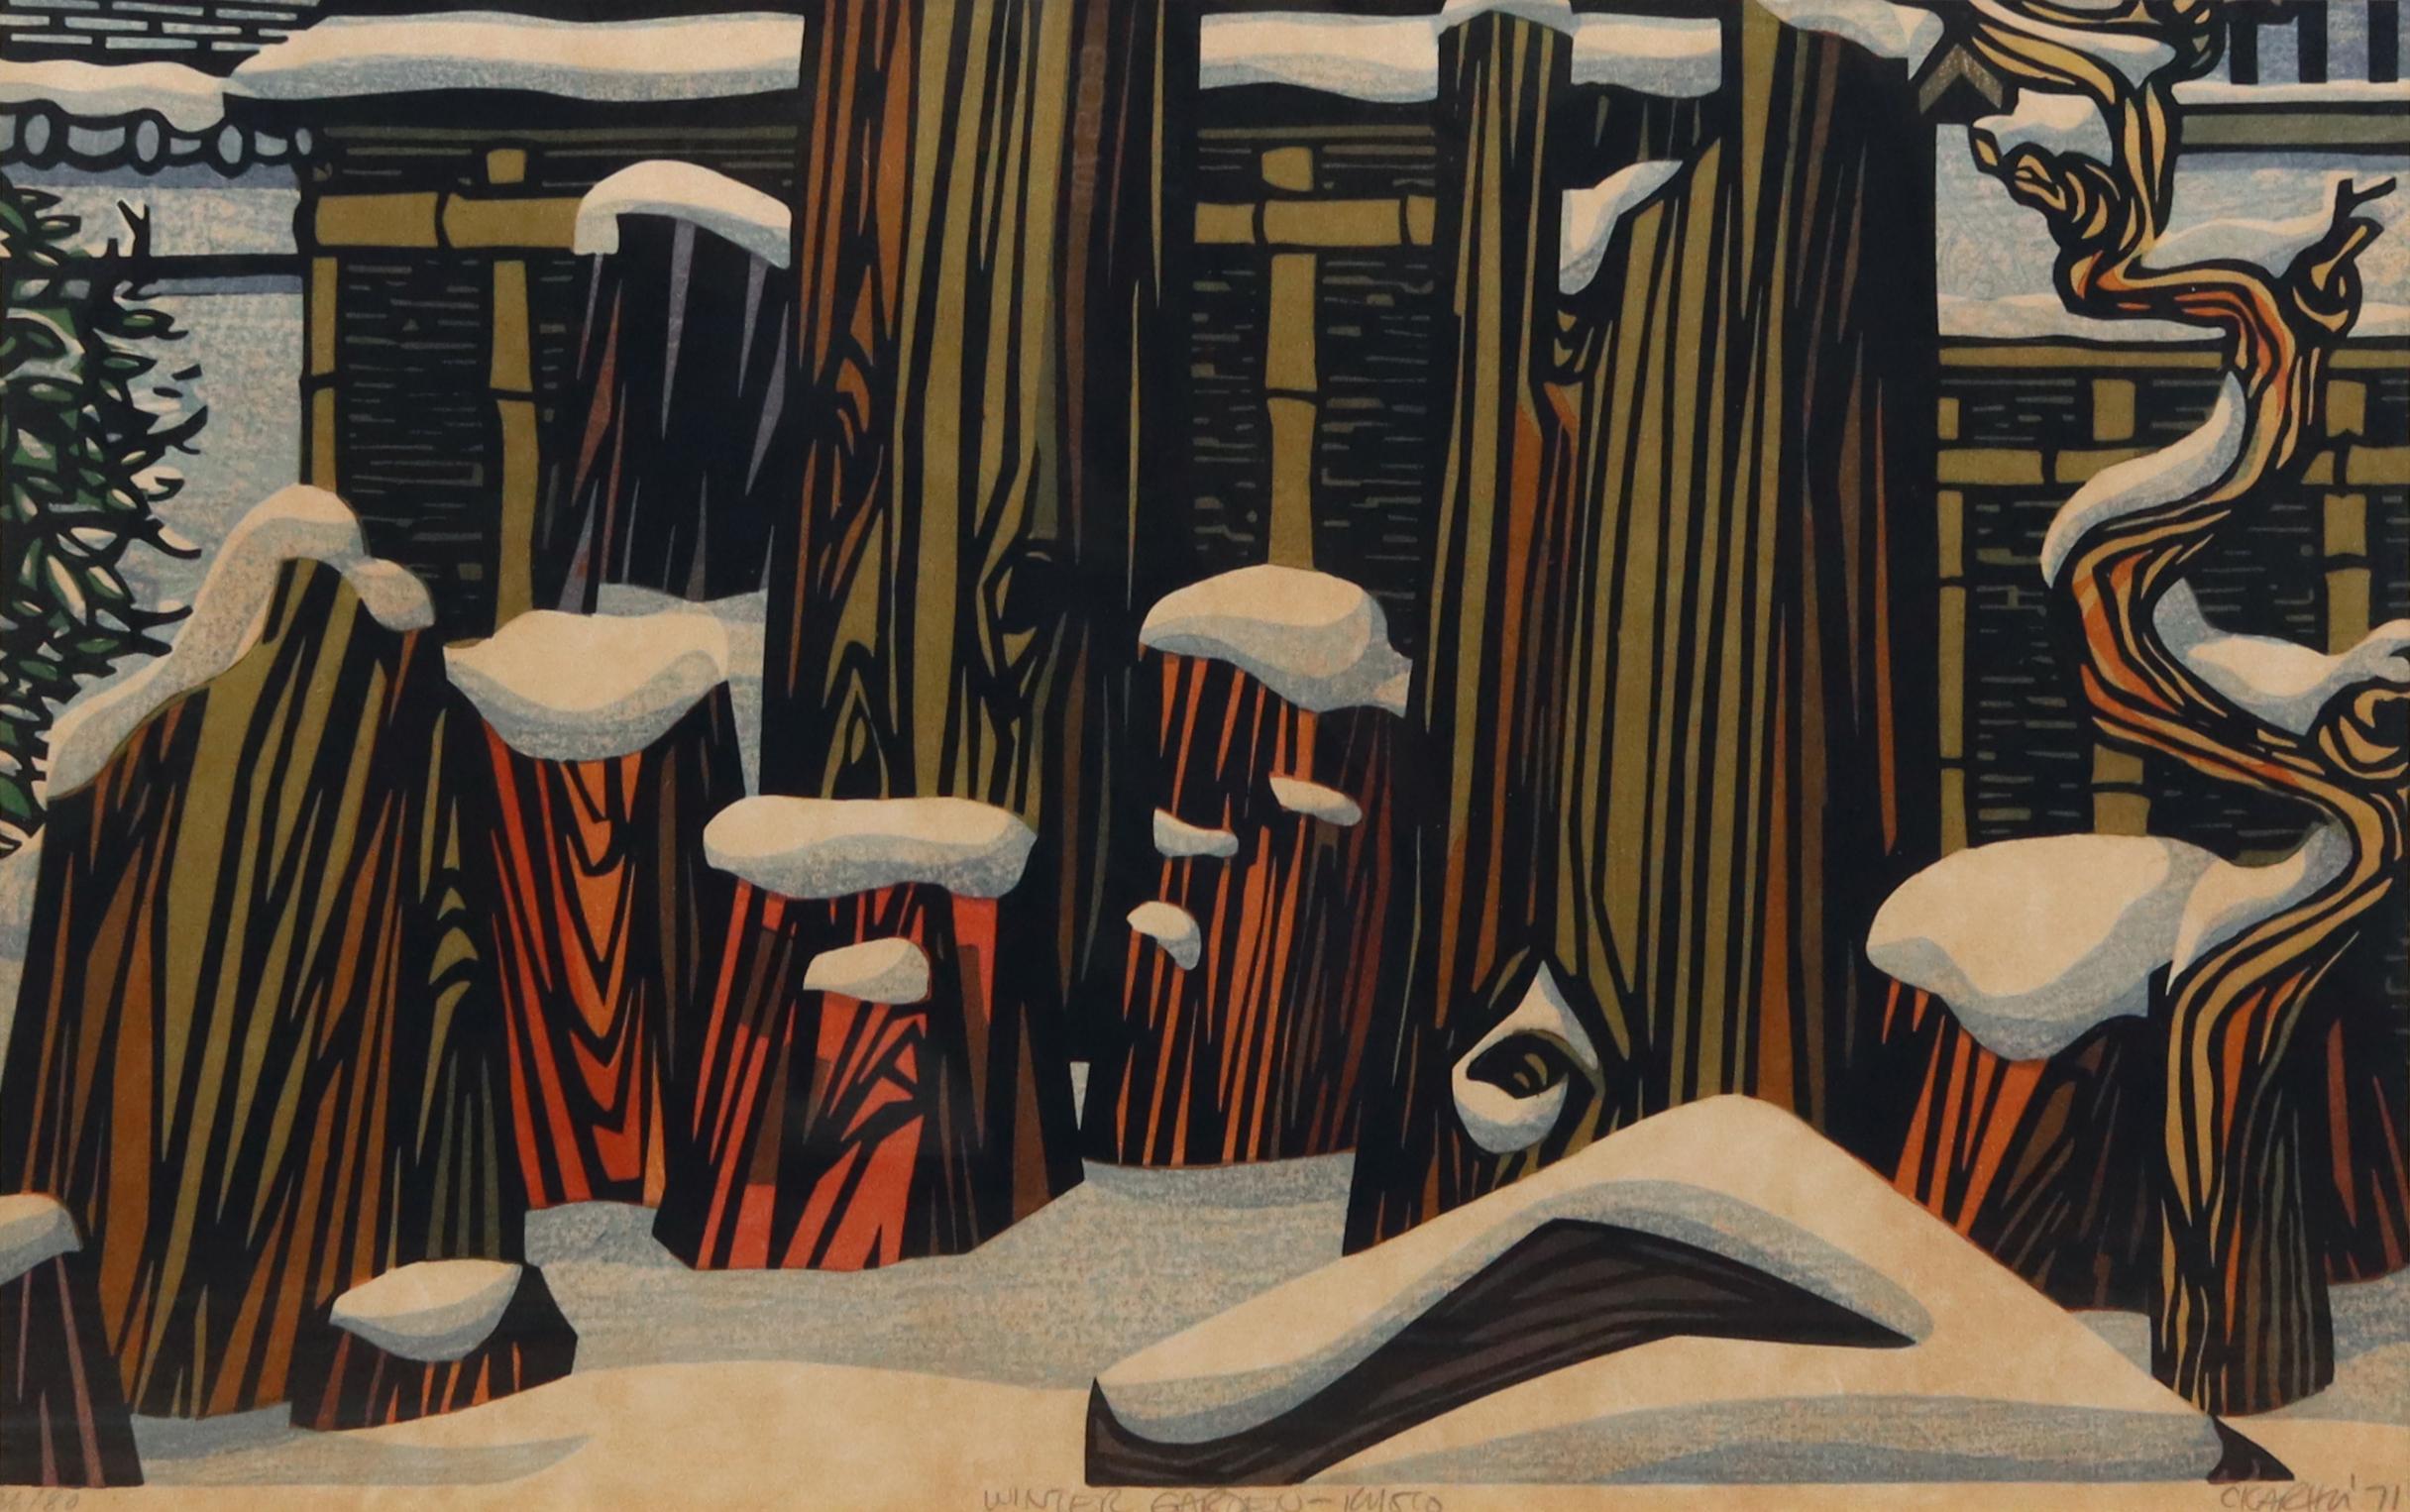 A Finnish-American who lived and died in Japan, Clifton Karhu (1927-2007) devoted himself to the art of woodblock printmaking and is today considered one of the foremost masters of the medium. He resided in Japan for over 50 years and drew